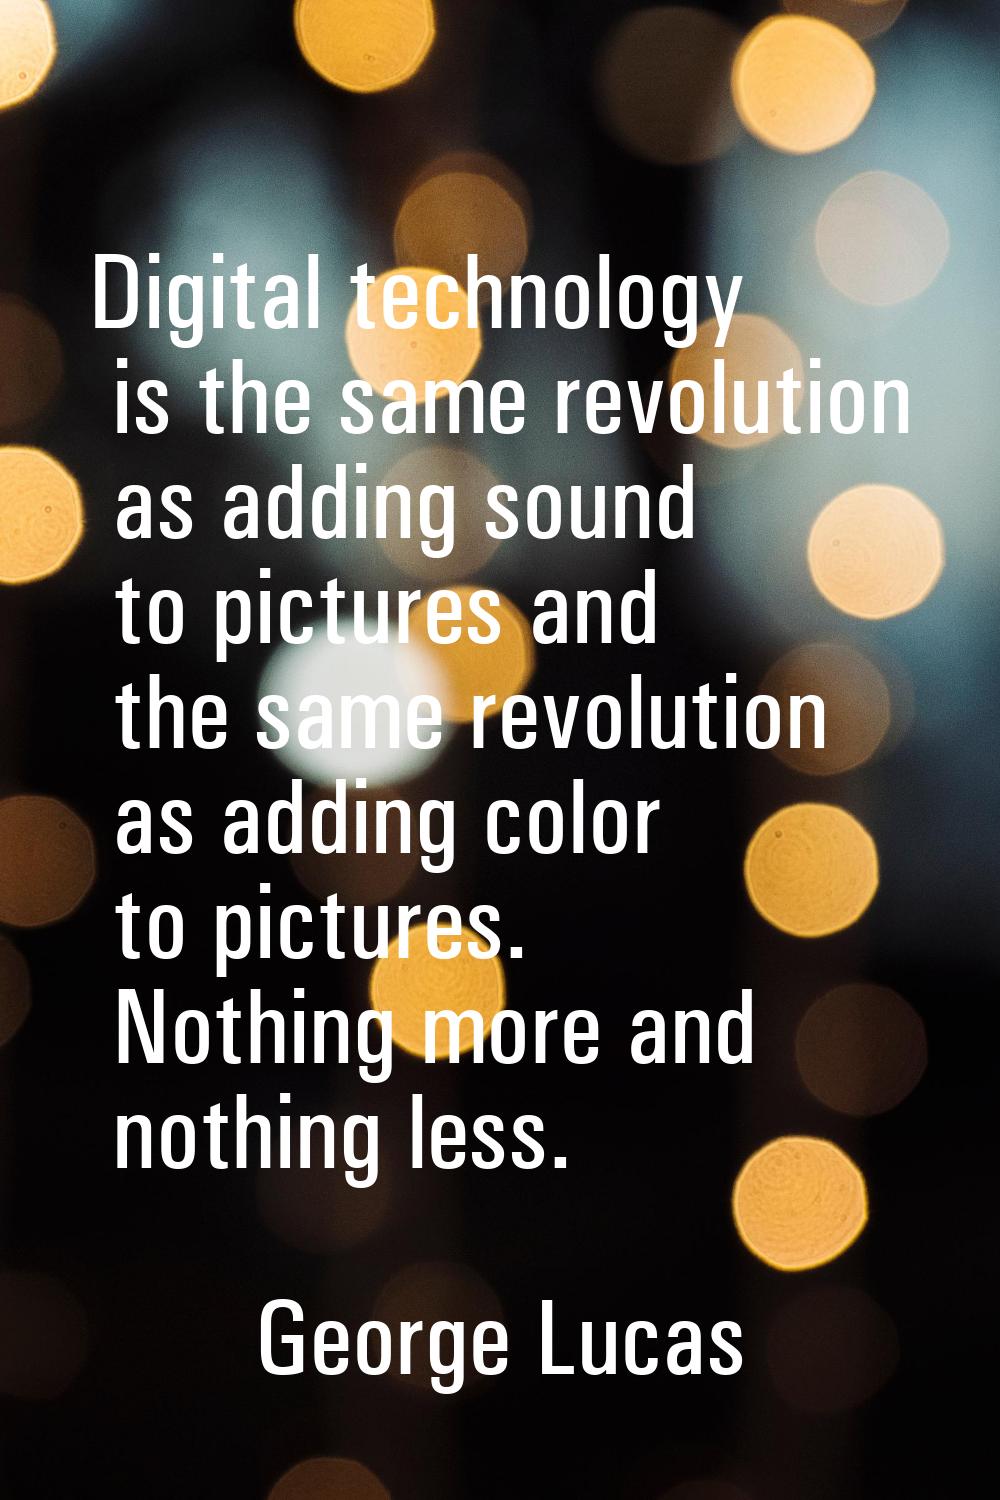 Digital technology is the same revolution as adding sound to pictures and the same revolution as ad